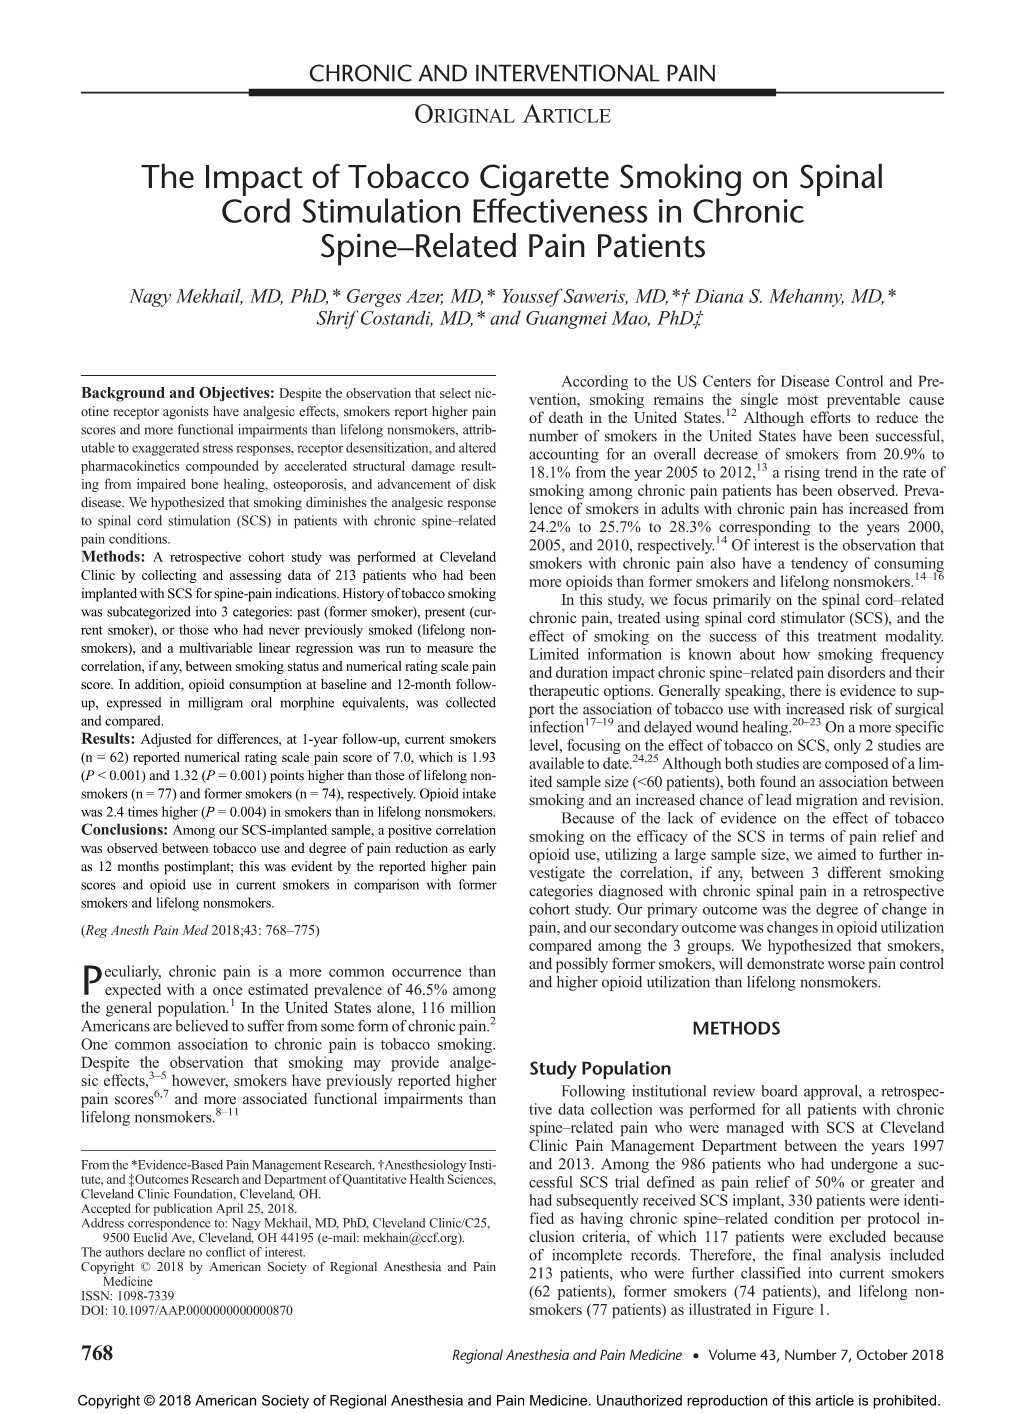 The Impact of Tobacco Cigarette Smoking on Spinal Cord Stimulation Effectiveness in Chronic Spine–Related Pain Patients